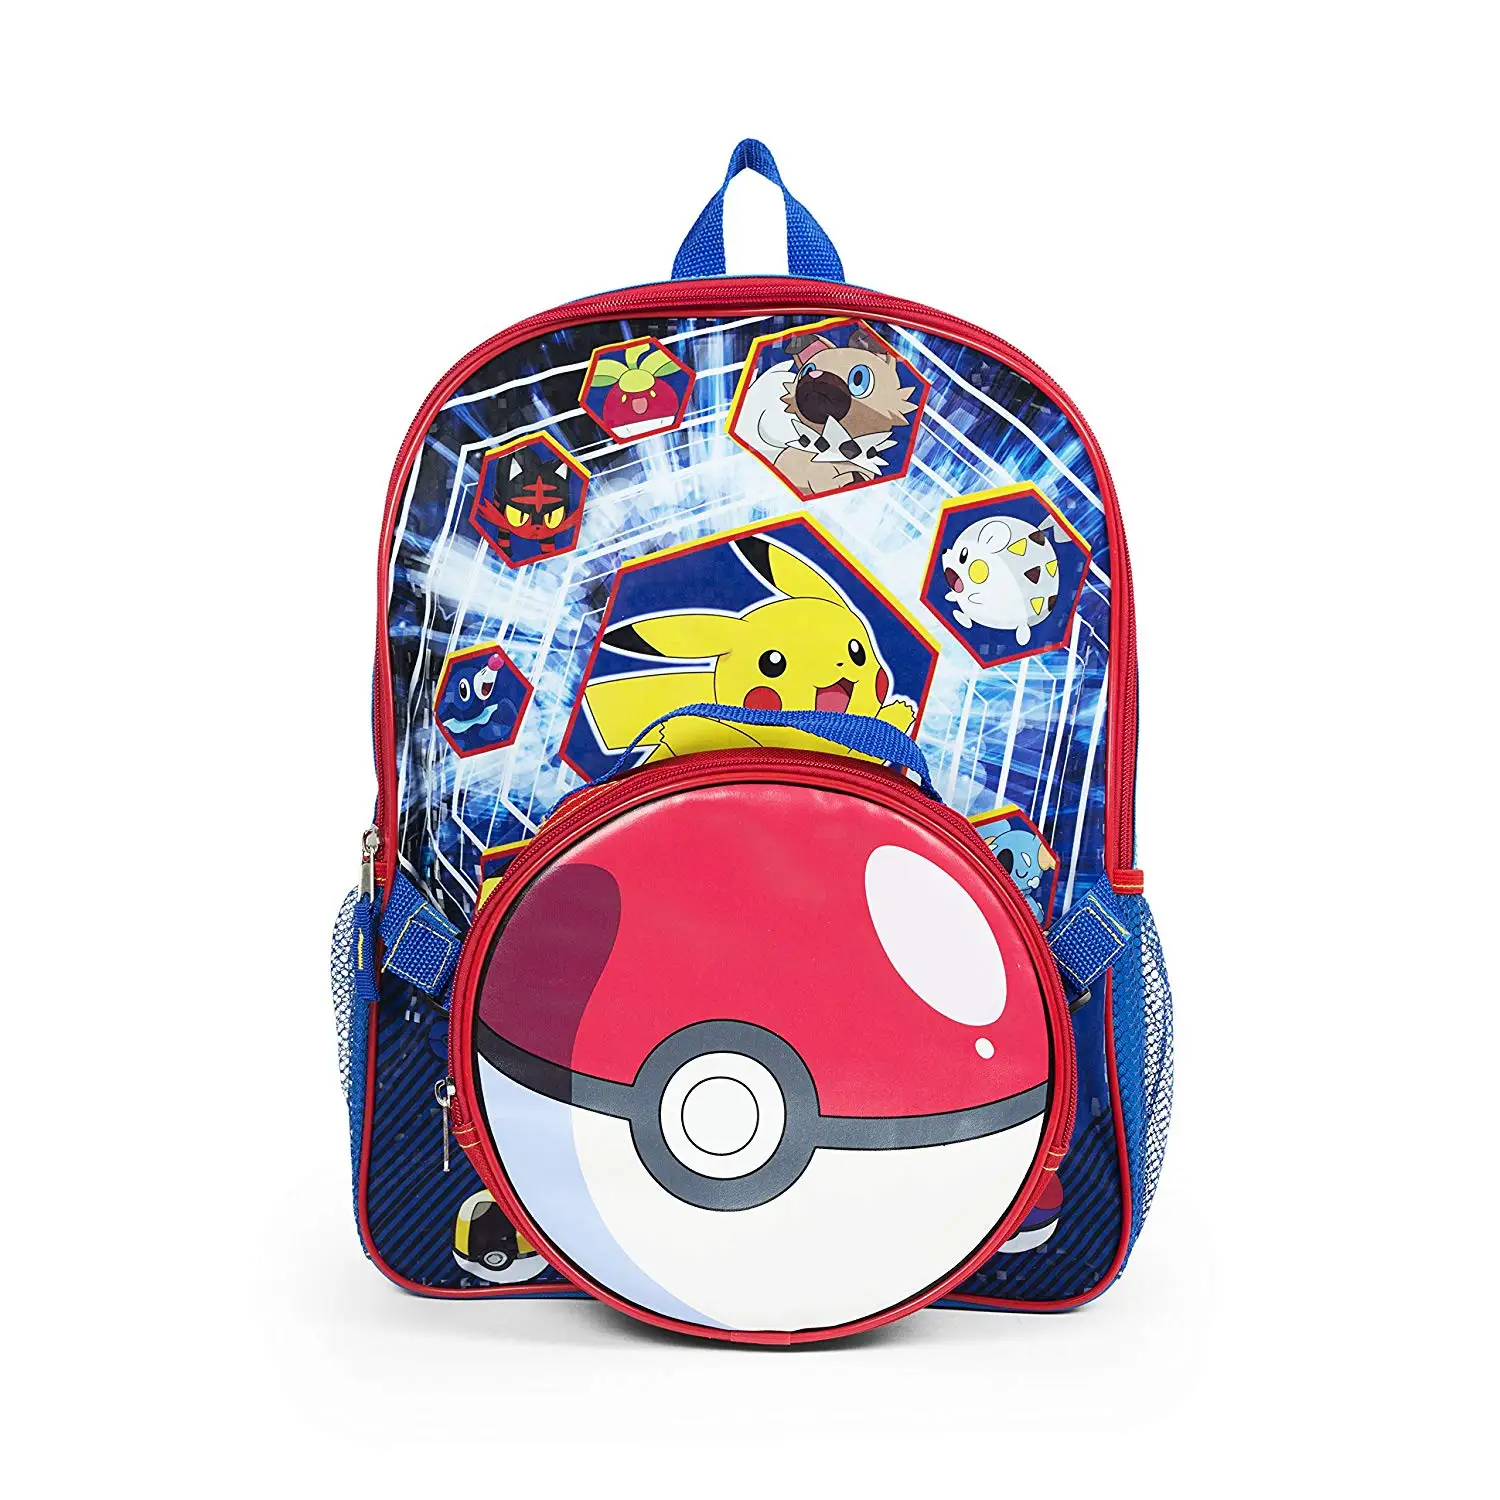 Buy Pokemon Pikachu Large Backpack With Matching Lunchbox